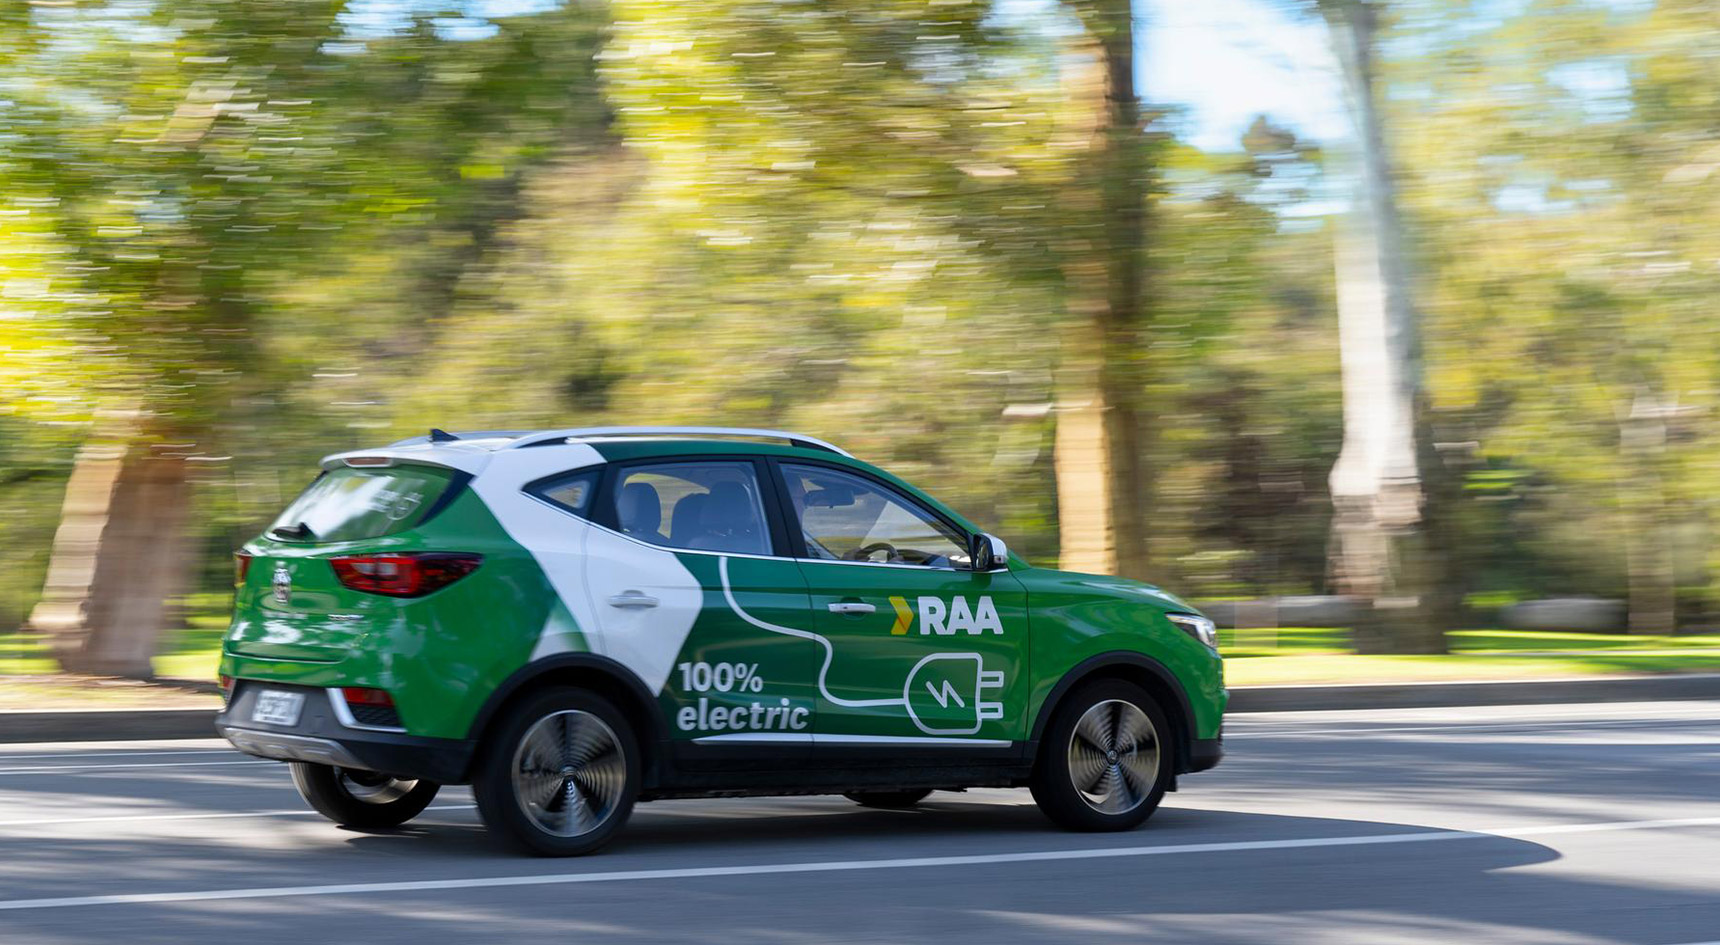 Green car travelling fast with RAA branding